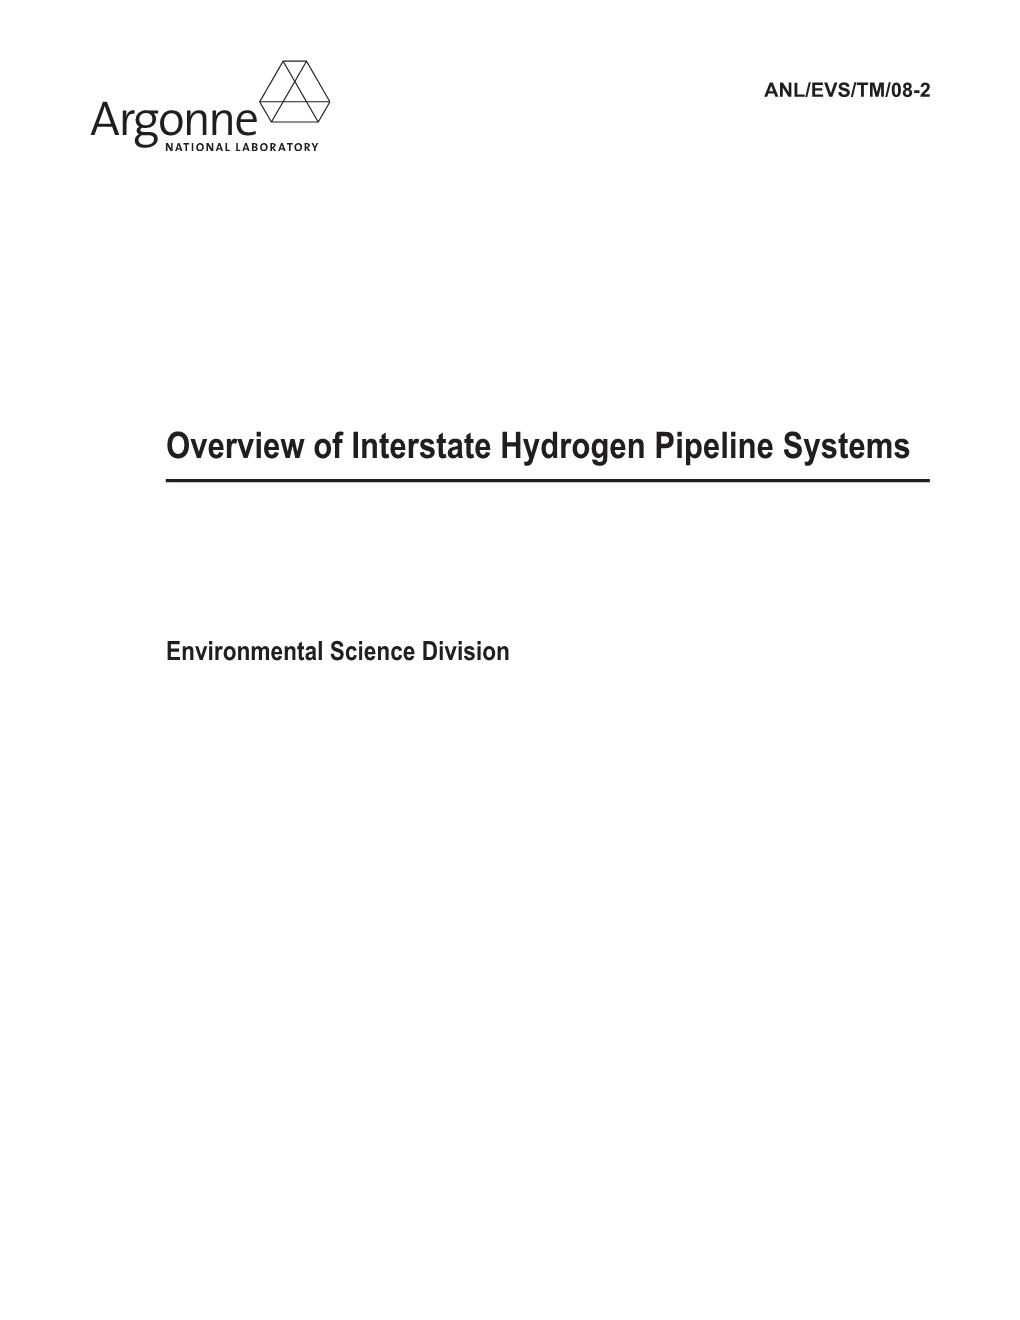 Overview of Interstate Hydrogen Pipeline Systems